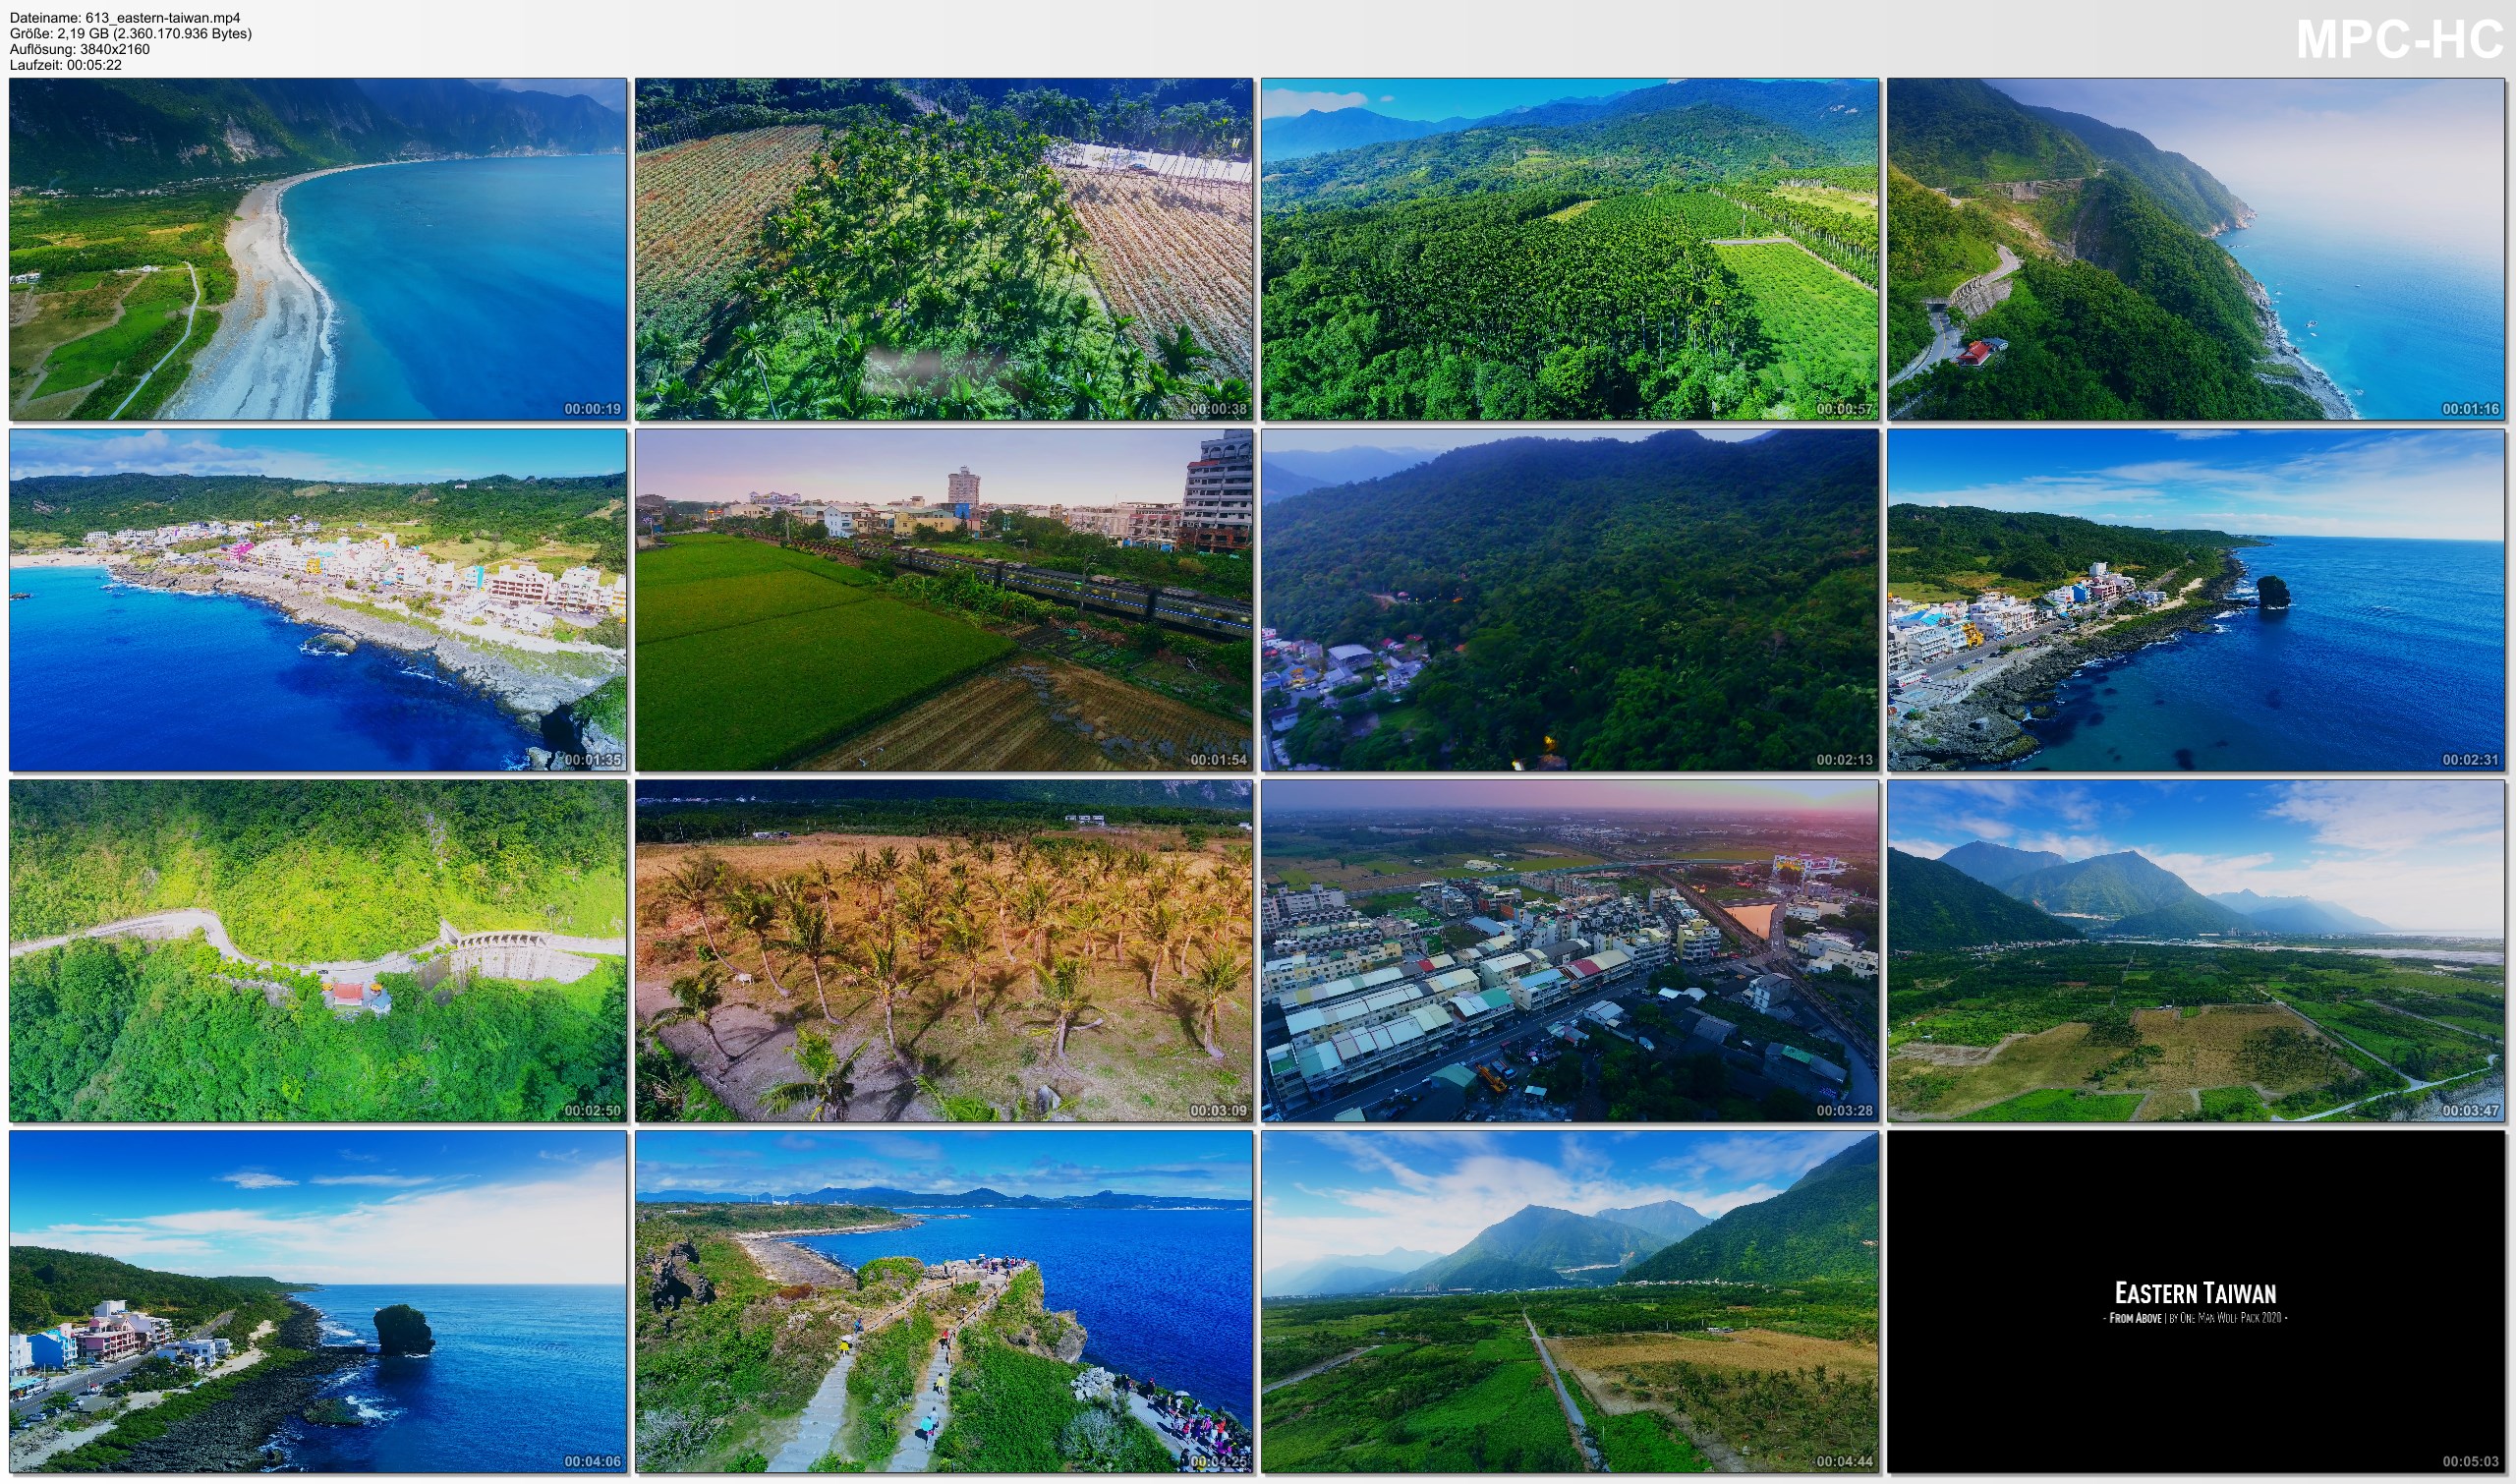 Drone Pictures from Video 【4K】The Nature of Eastern Taiwan from Above - TAIWAN 2020 | Cinematic Wolf Aerial™ Drone Film